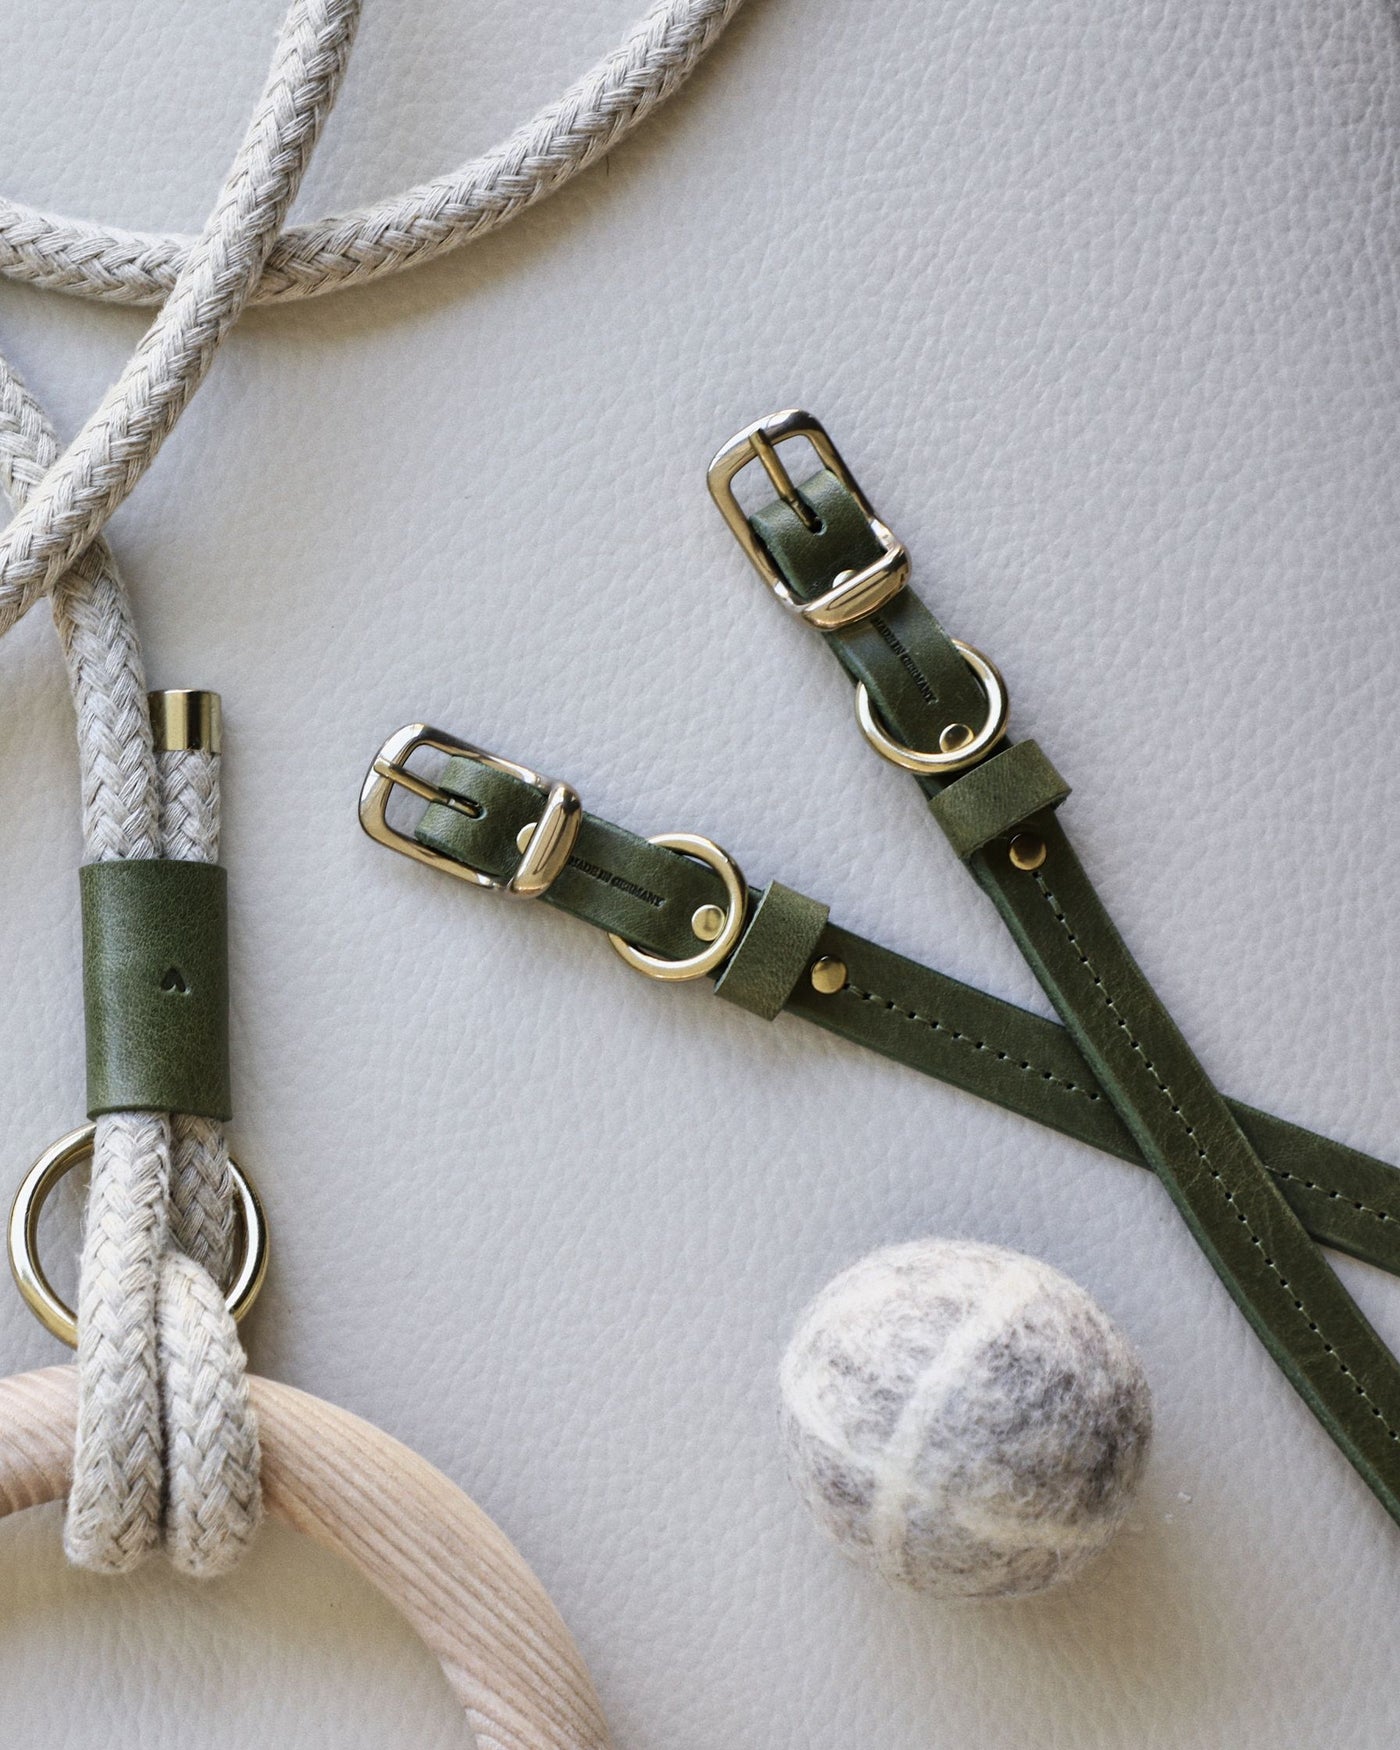 Green leather collar with brass hardware. Wood dowel rope leash also pictured as well as wool dog ball toy